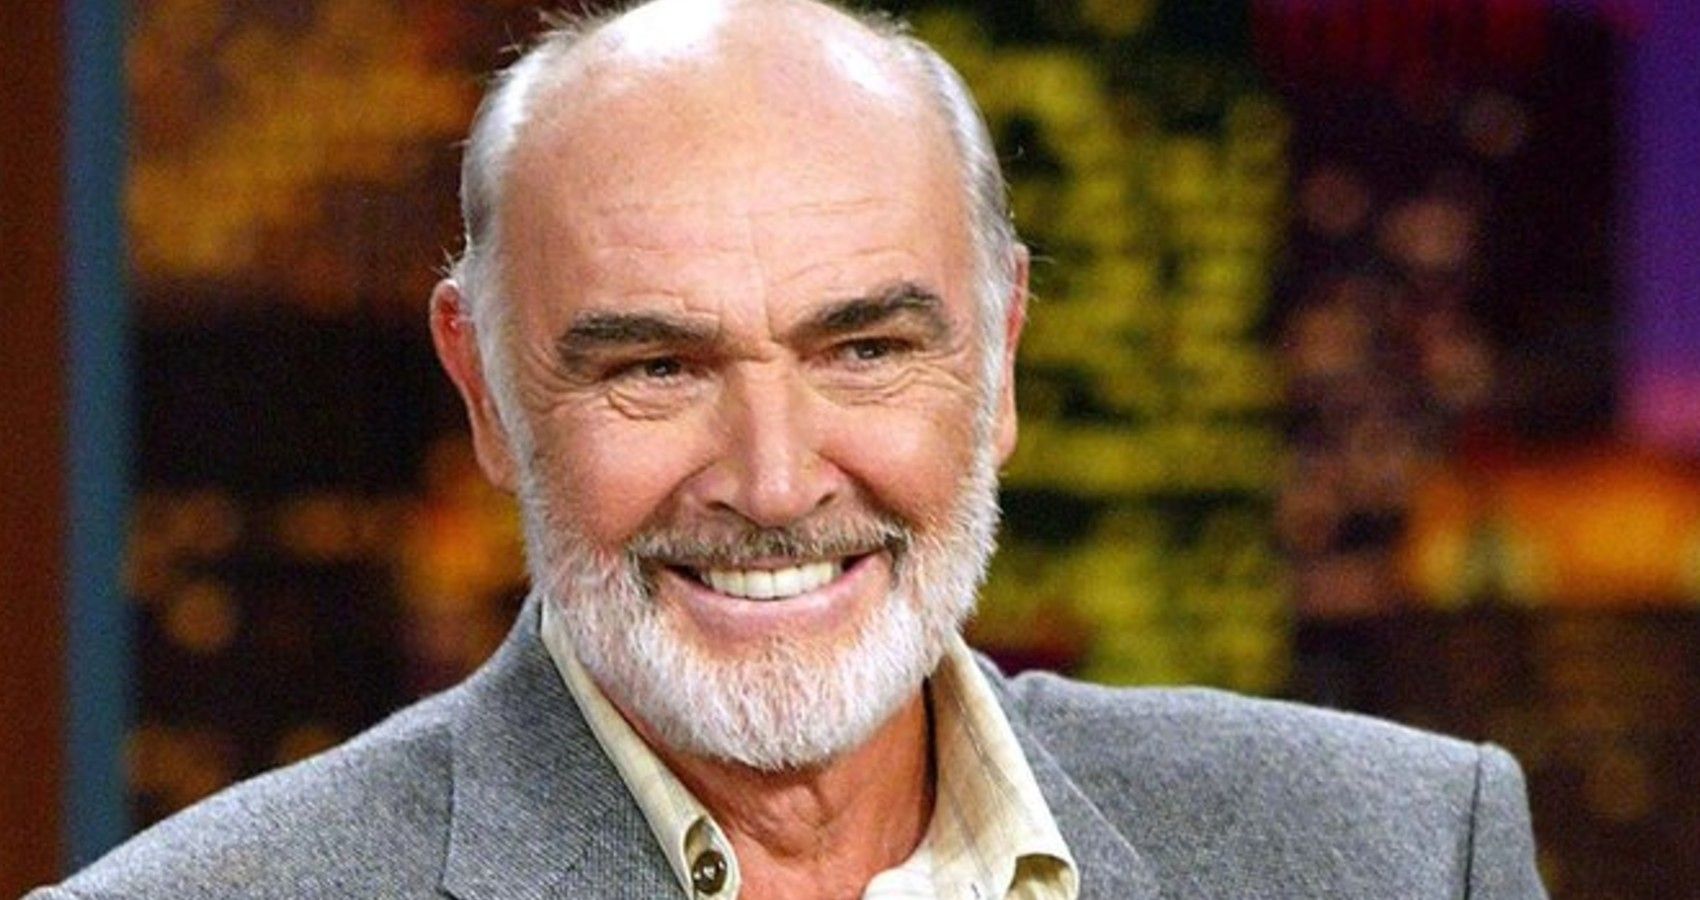 Sean Connery doing an interview